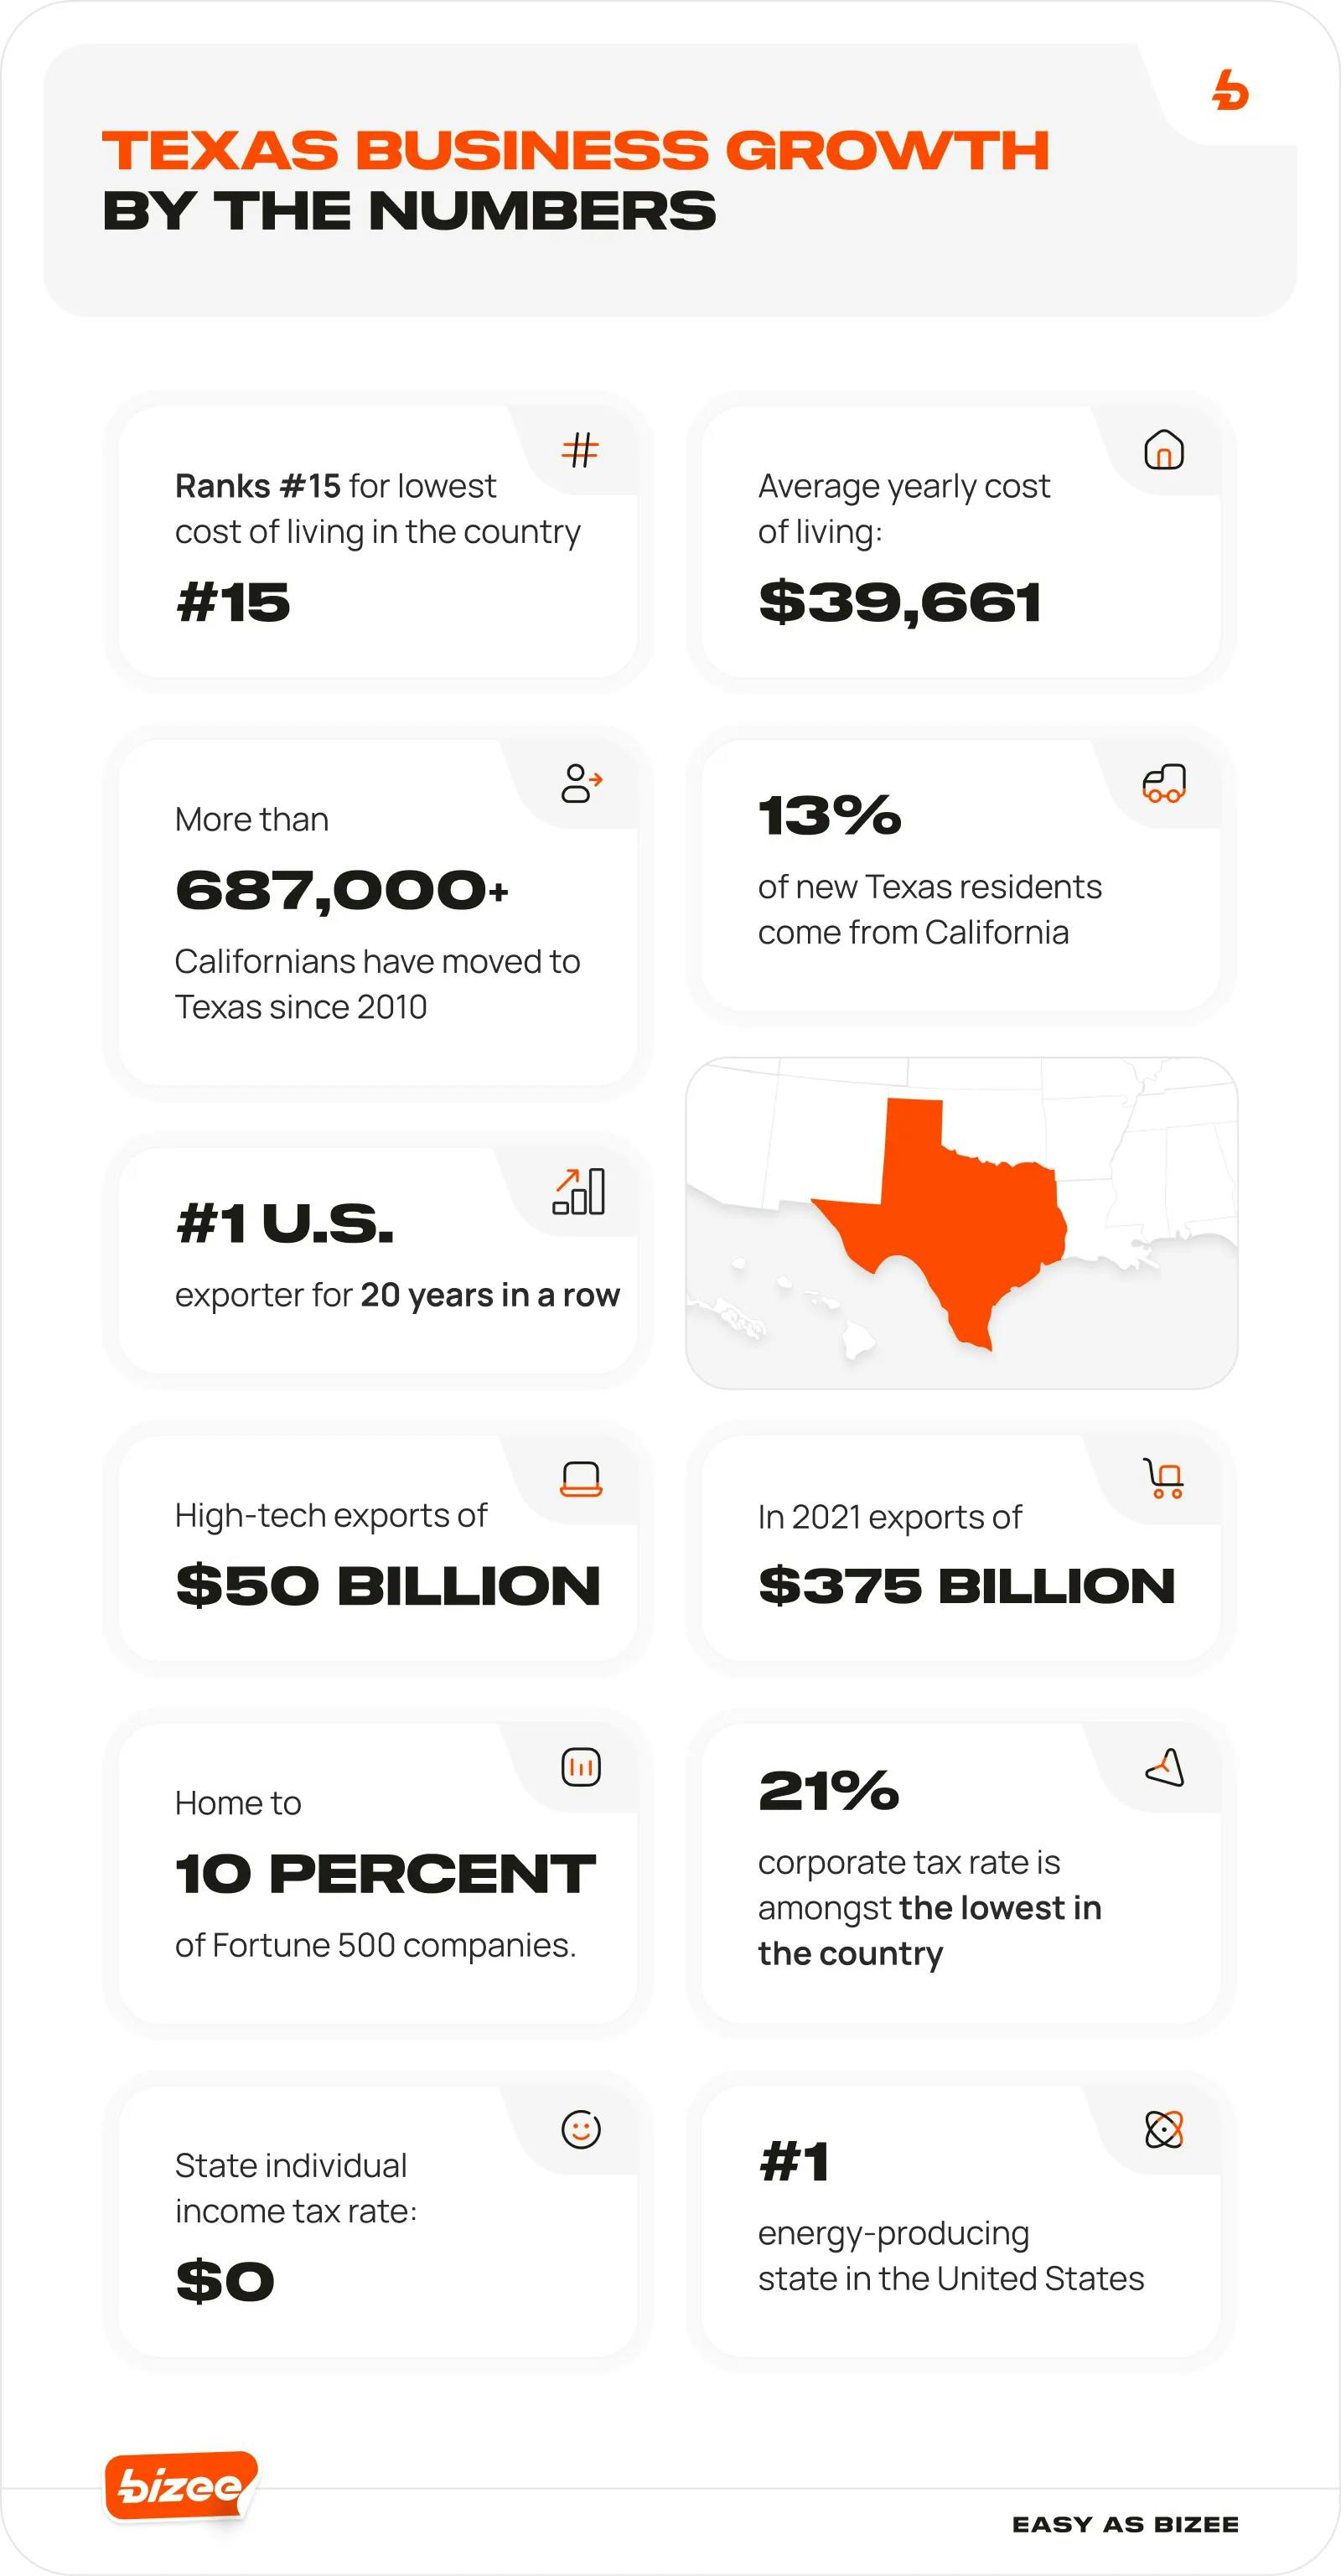 Texas Business Growth by the Numbers